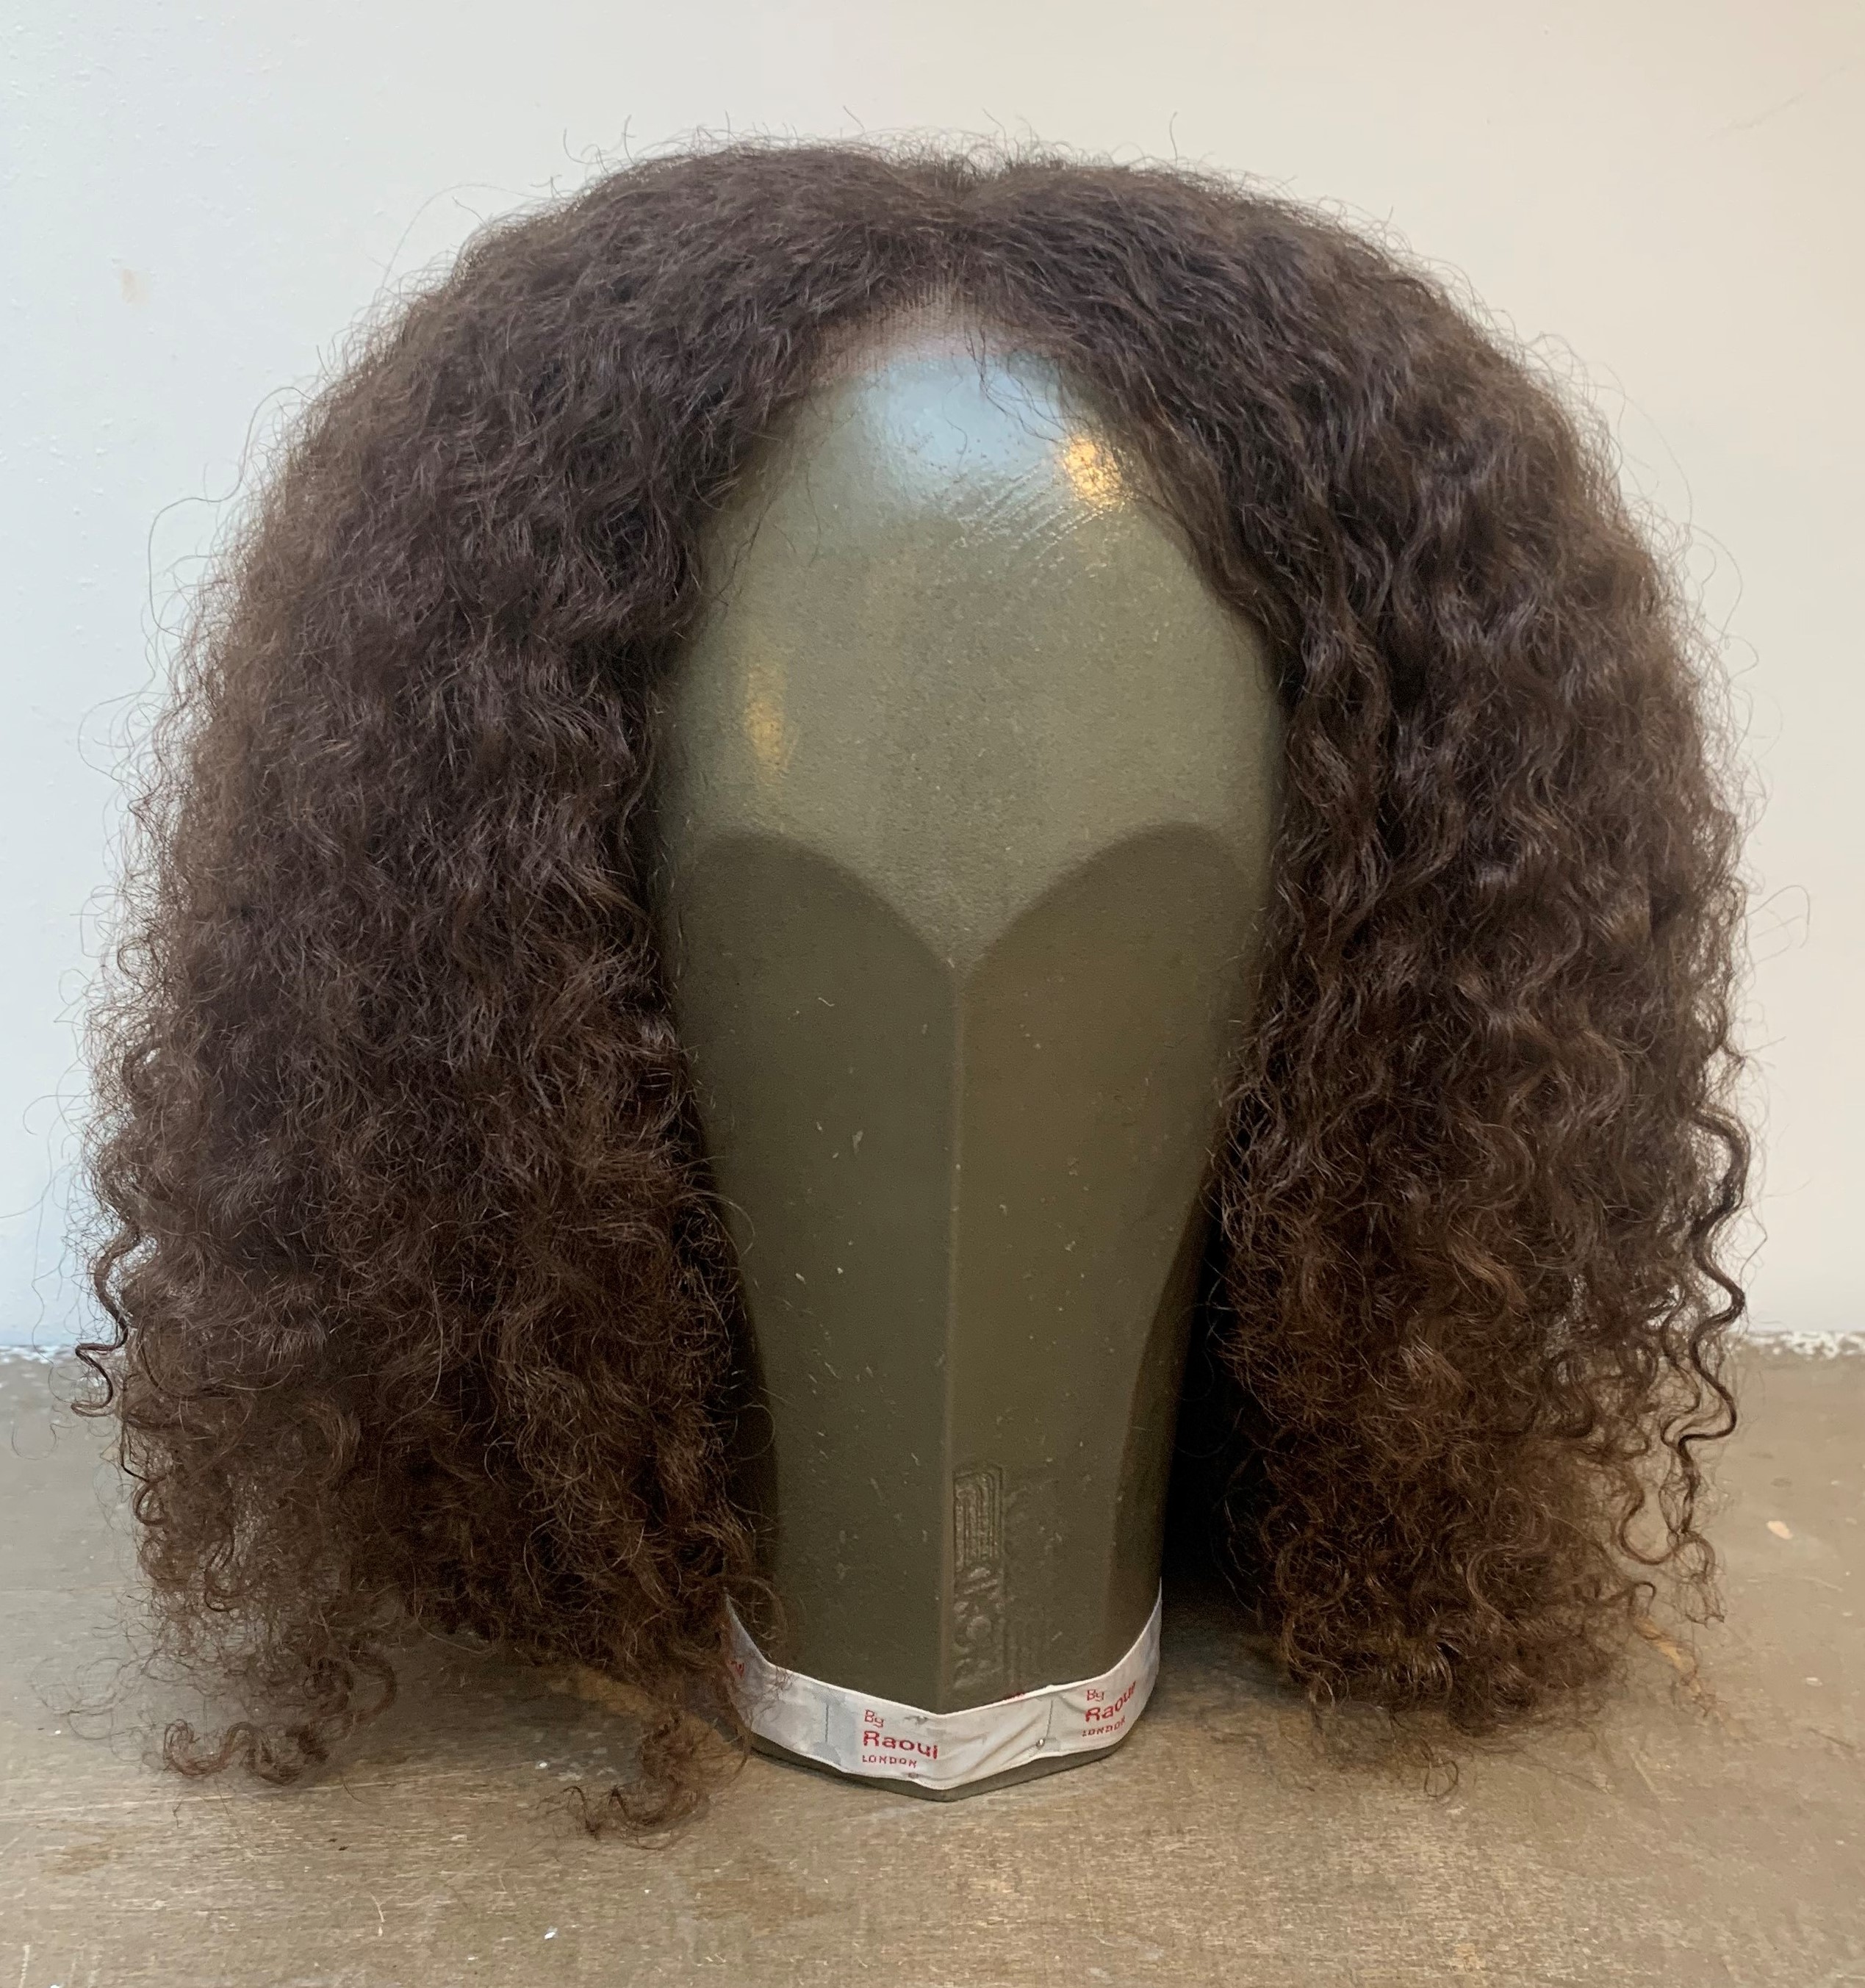 Raoul Wigmakers made this first wig from Afro-textured hair donations for The Little Princess Trust last year.